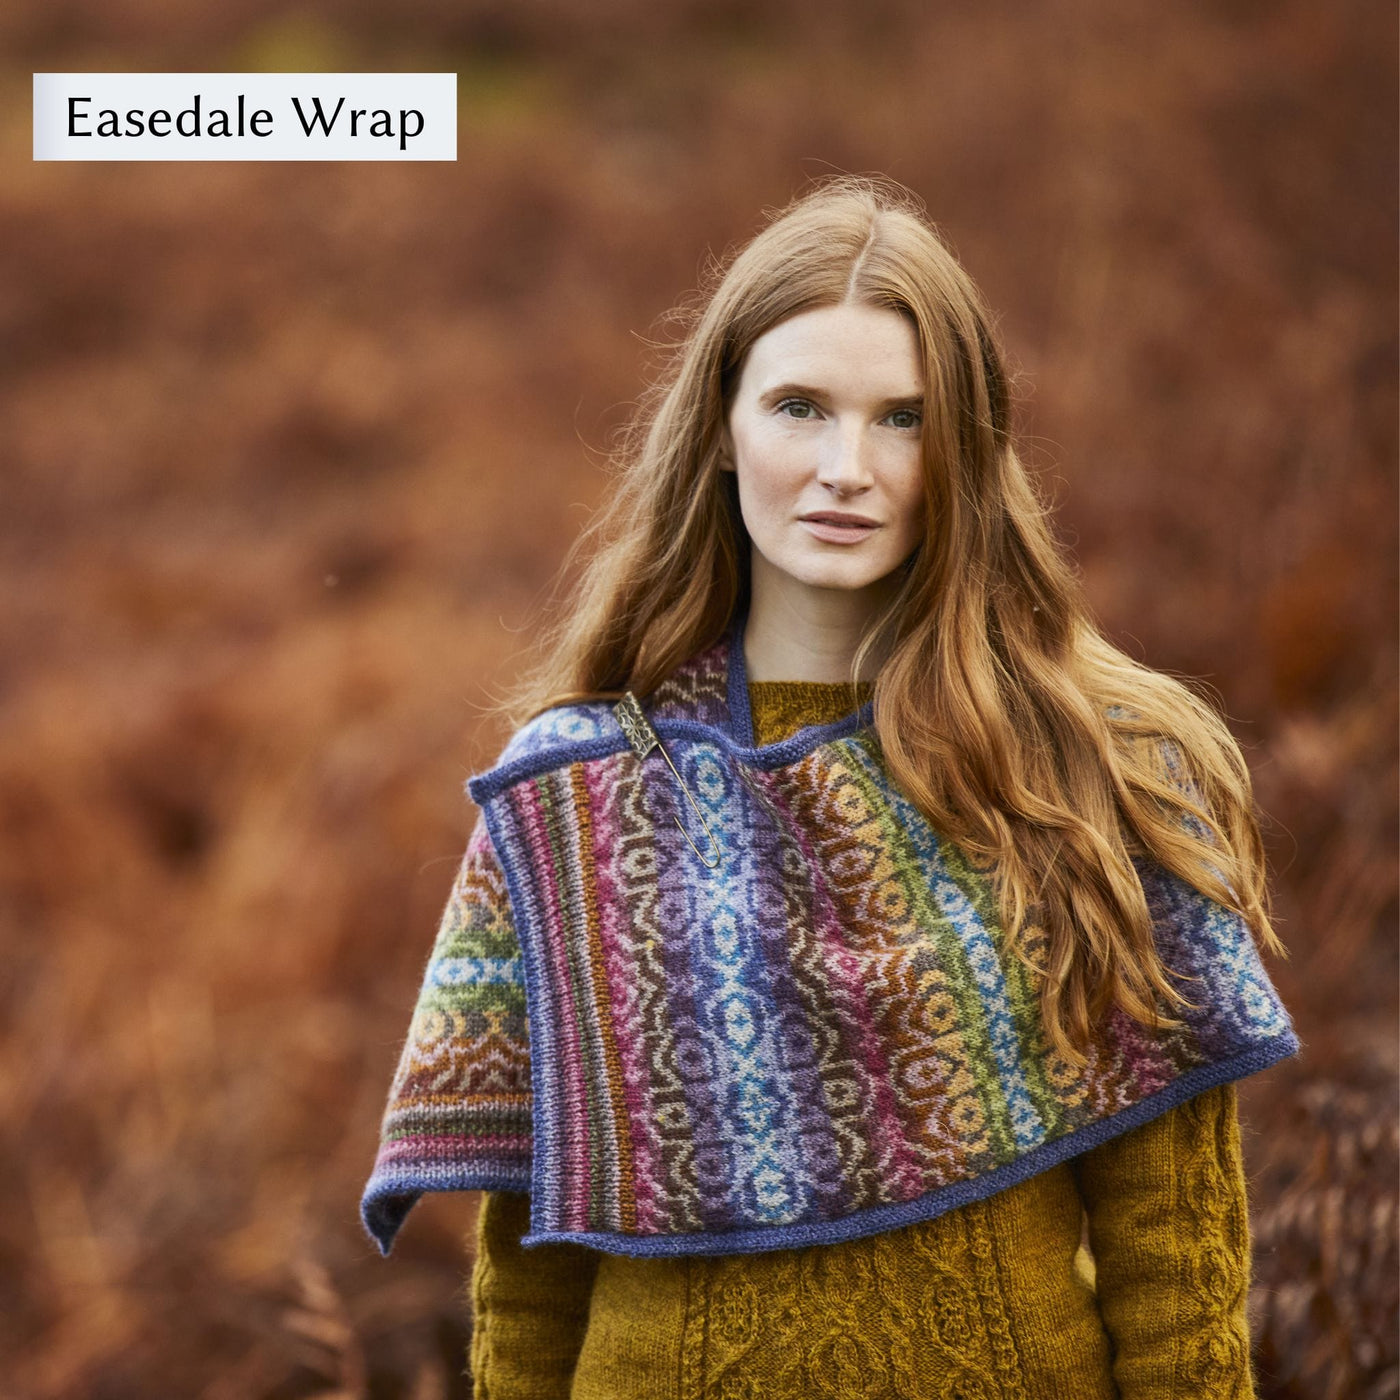 Female model wearing the Easedale Wrap design, which is an allover colorwork design  from Westmorland book by Marie Wallin.